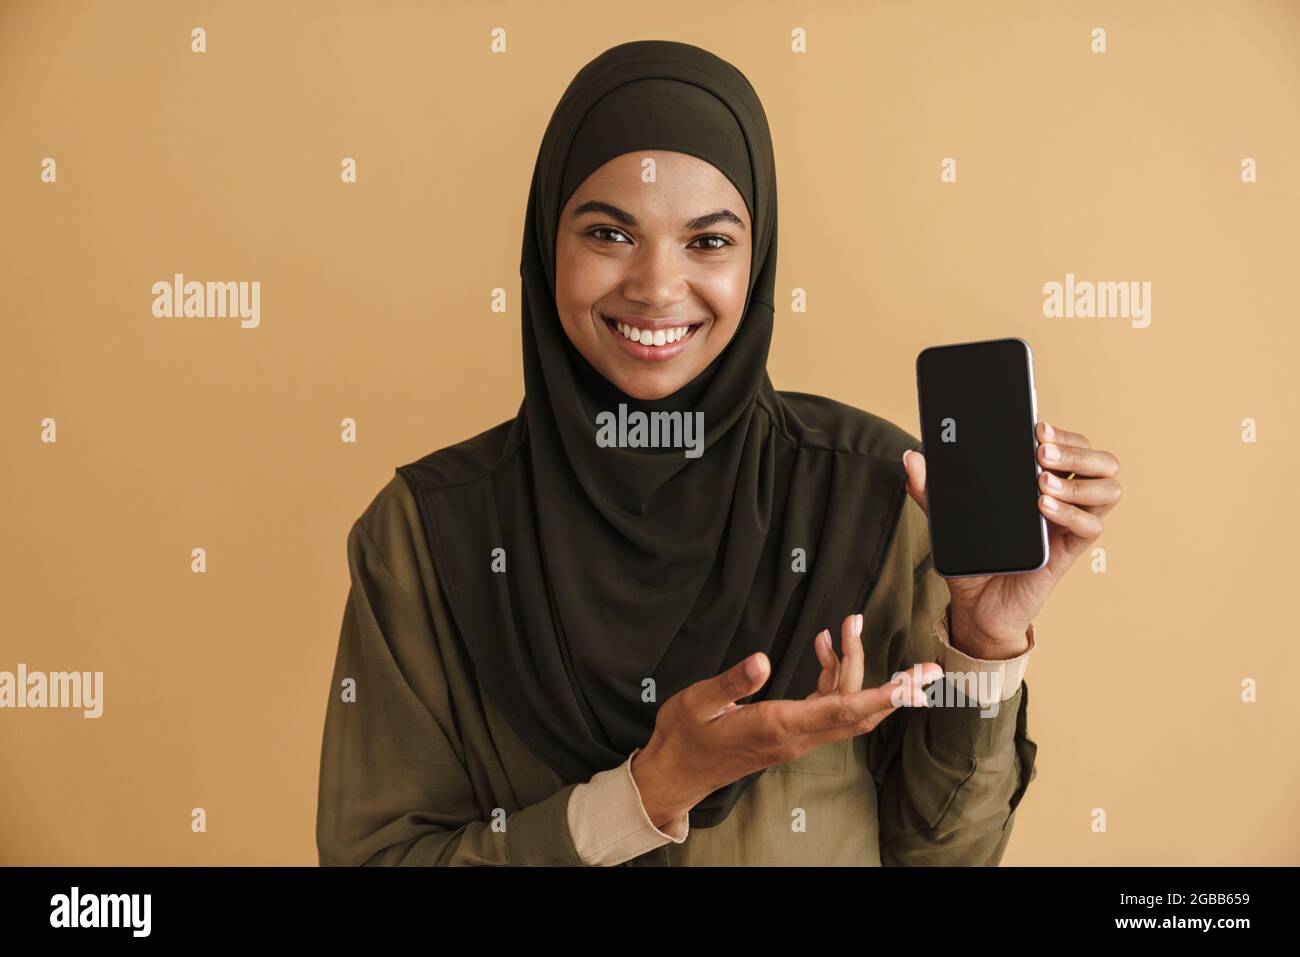 Black muslim woman in hijab smiling and showing mobile phone isolated over beige background Stock Photo